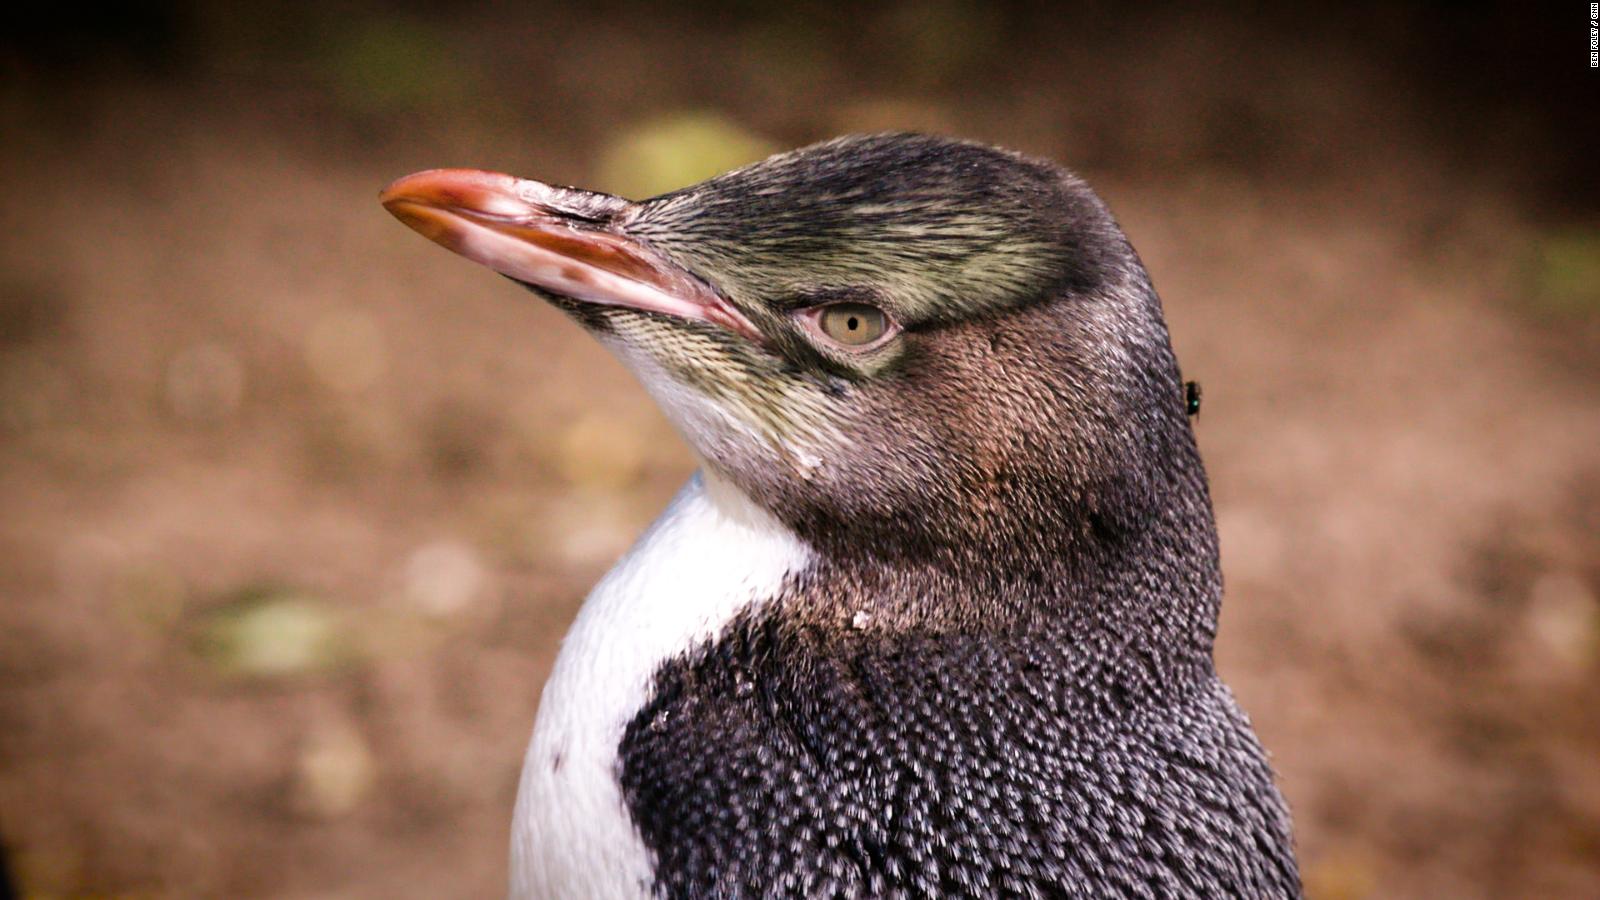 Patients at this rehab center aren’t human, they’re penguins